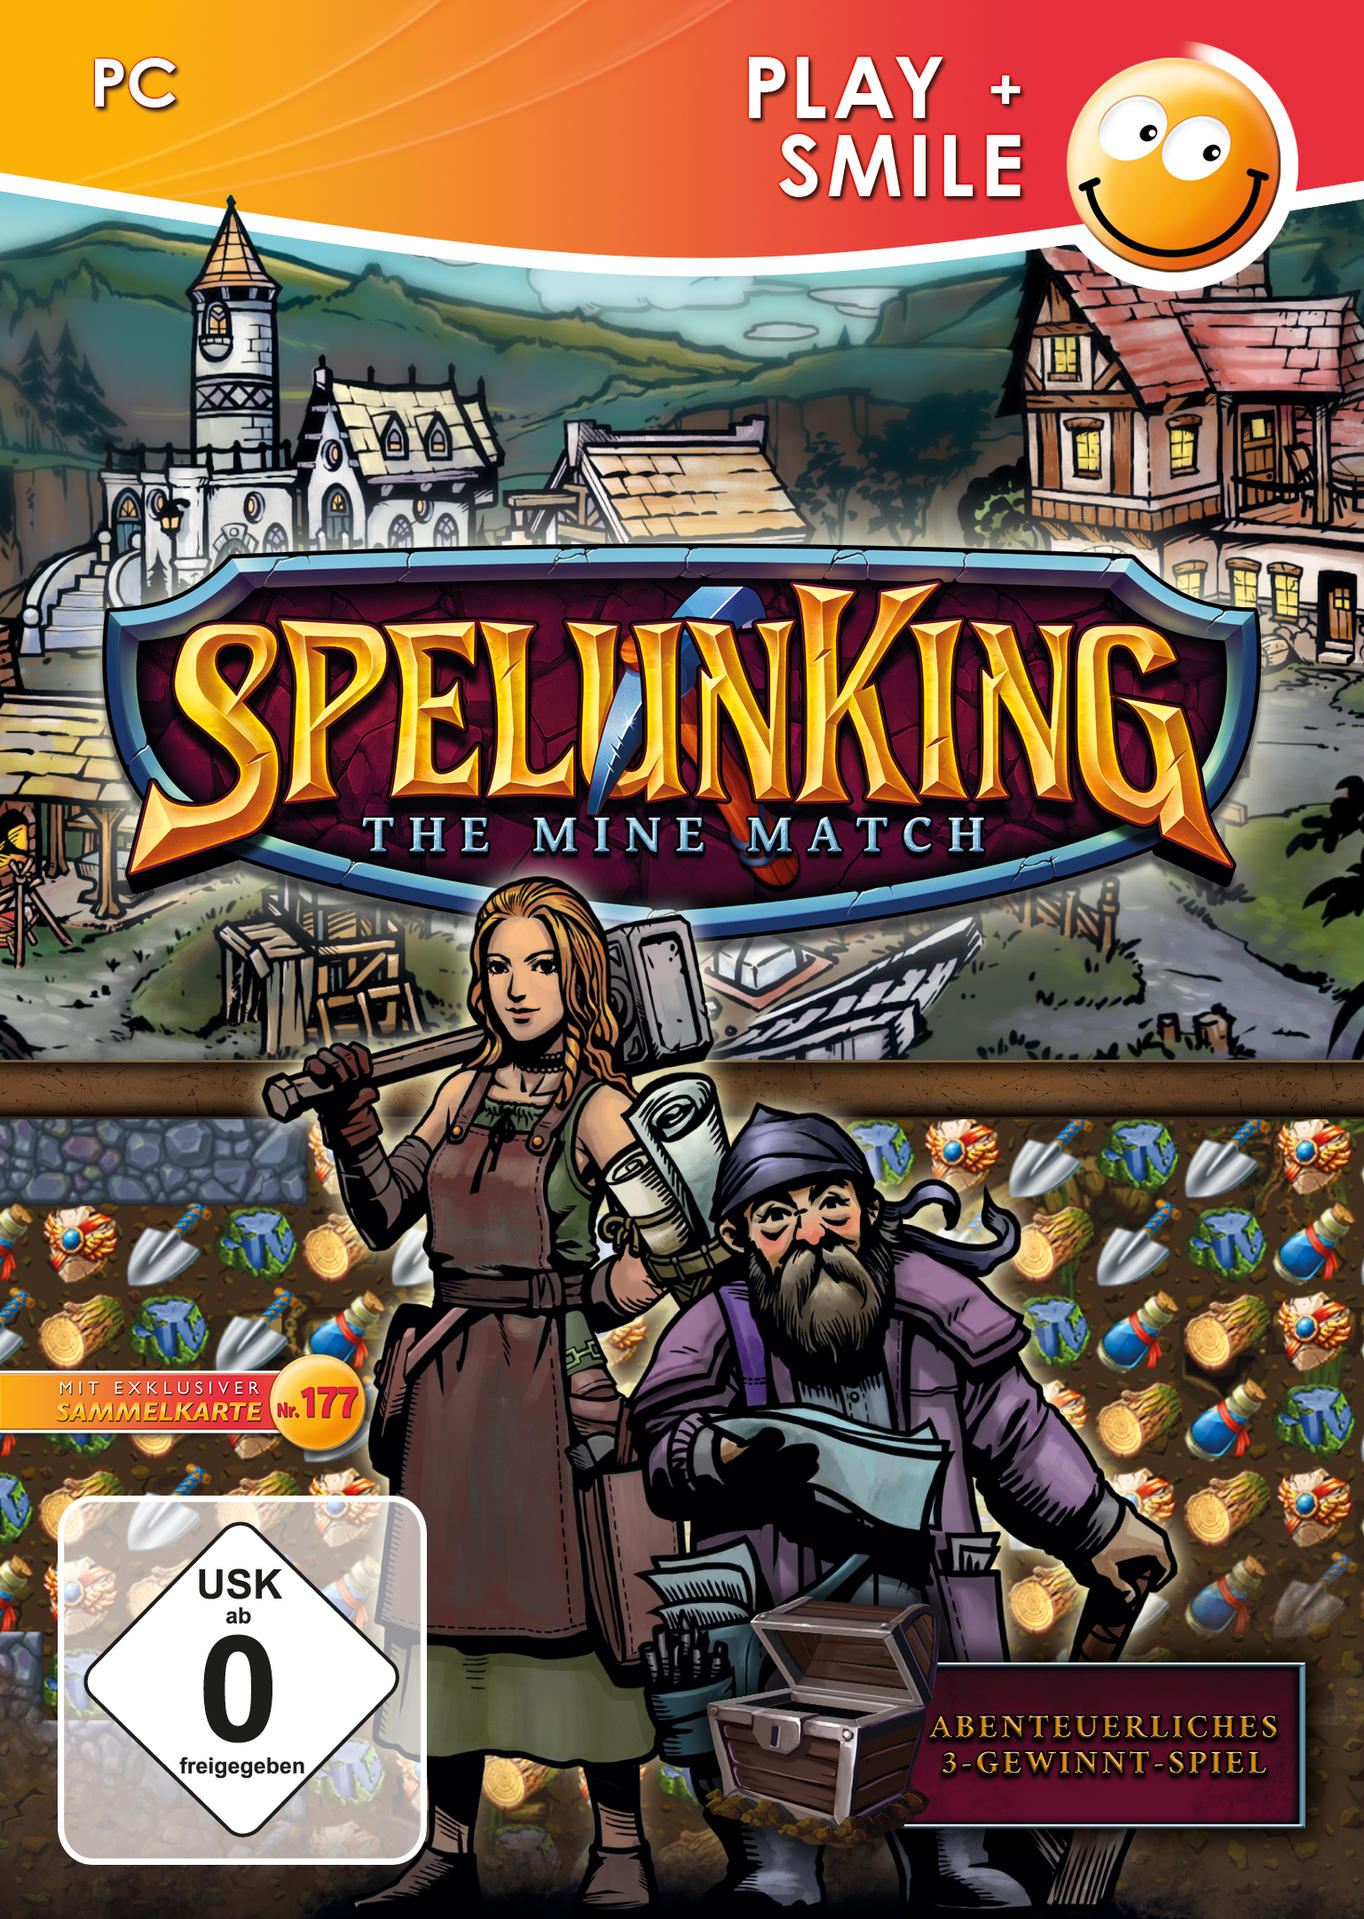 [PC] The SpelunKing: Match - Mine